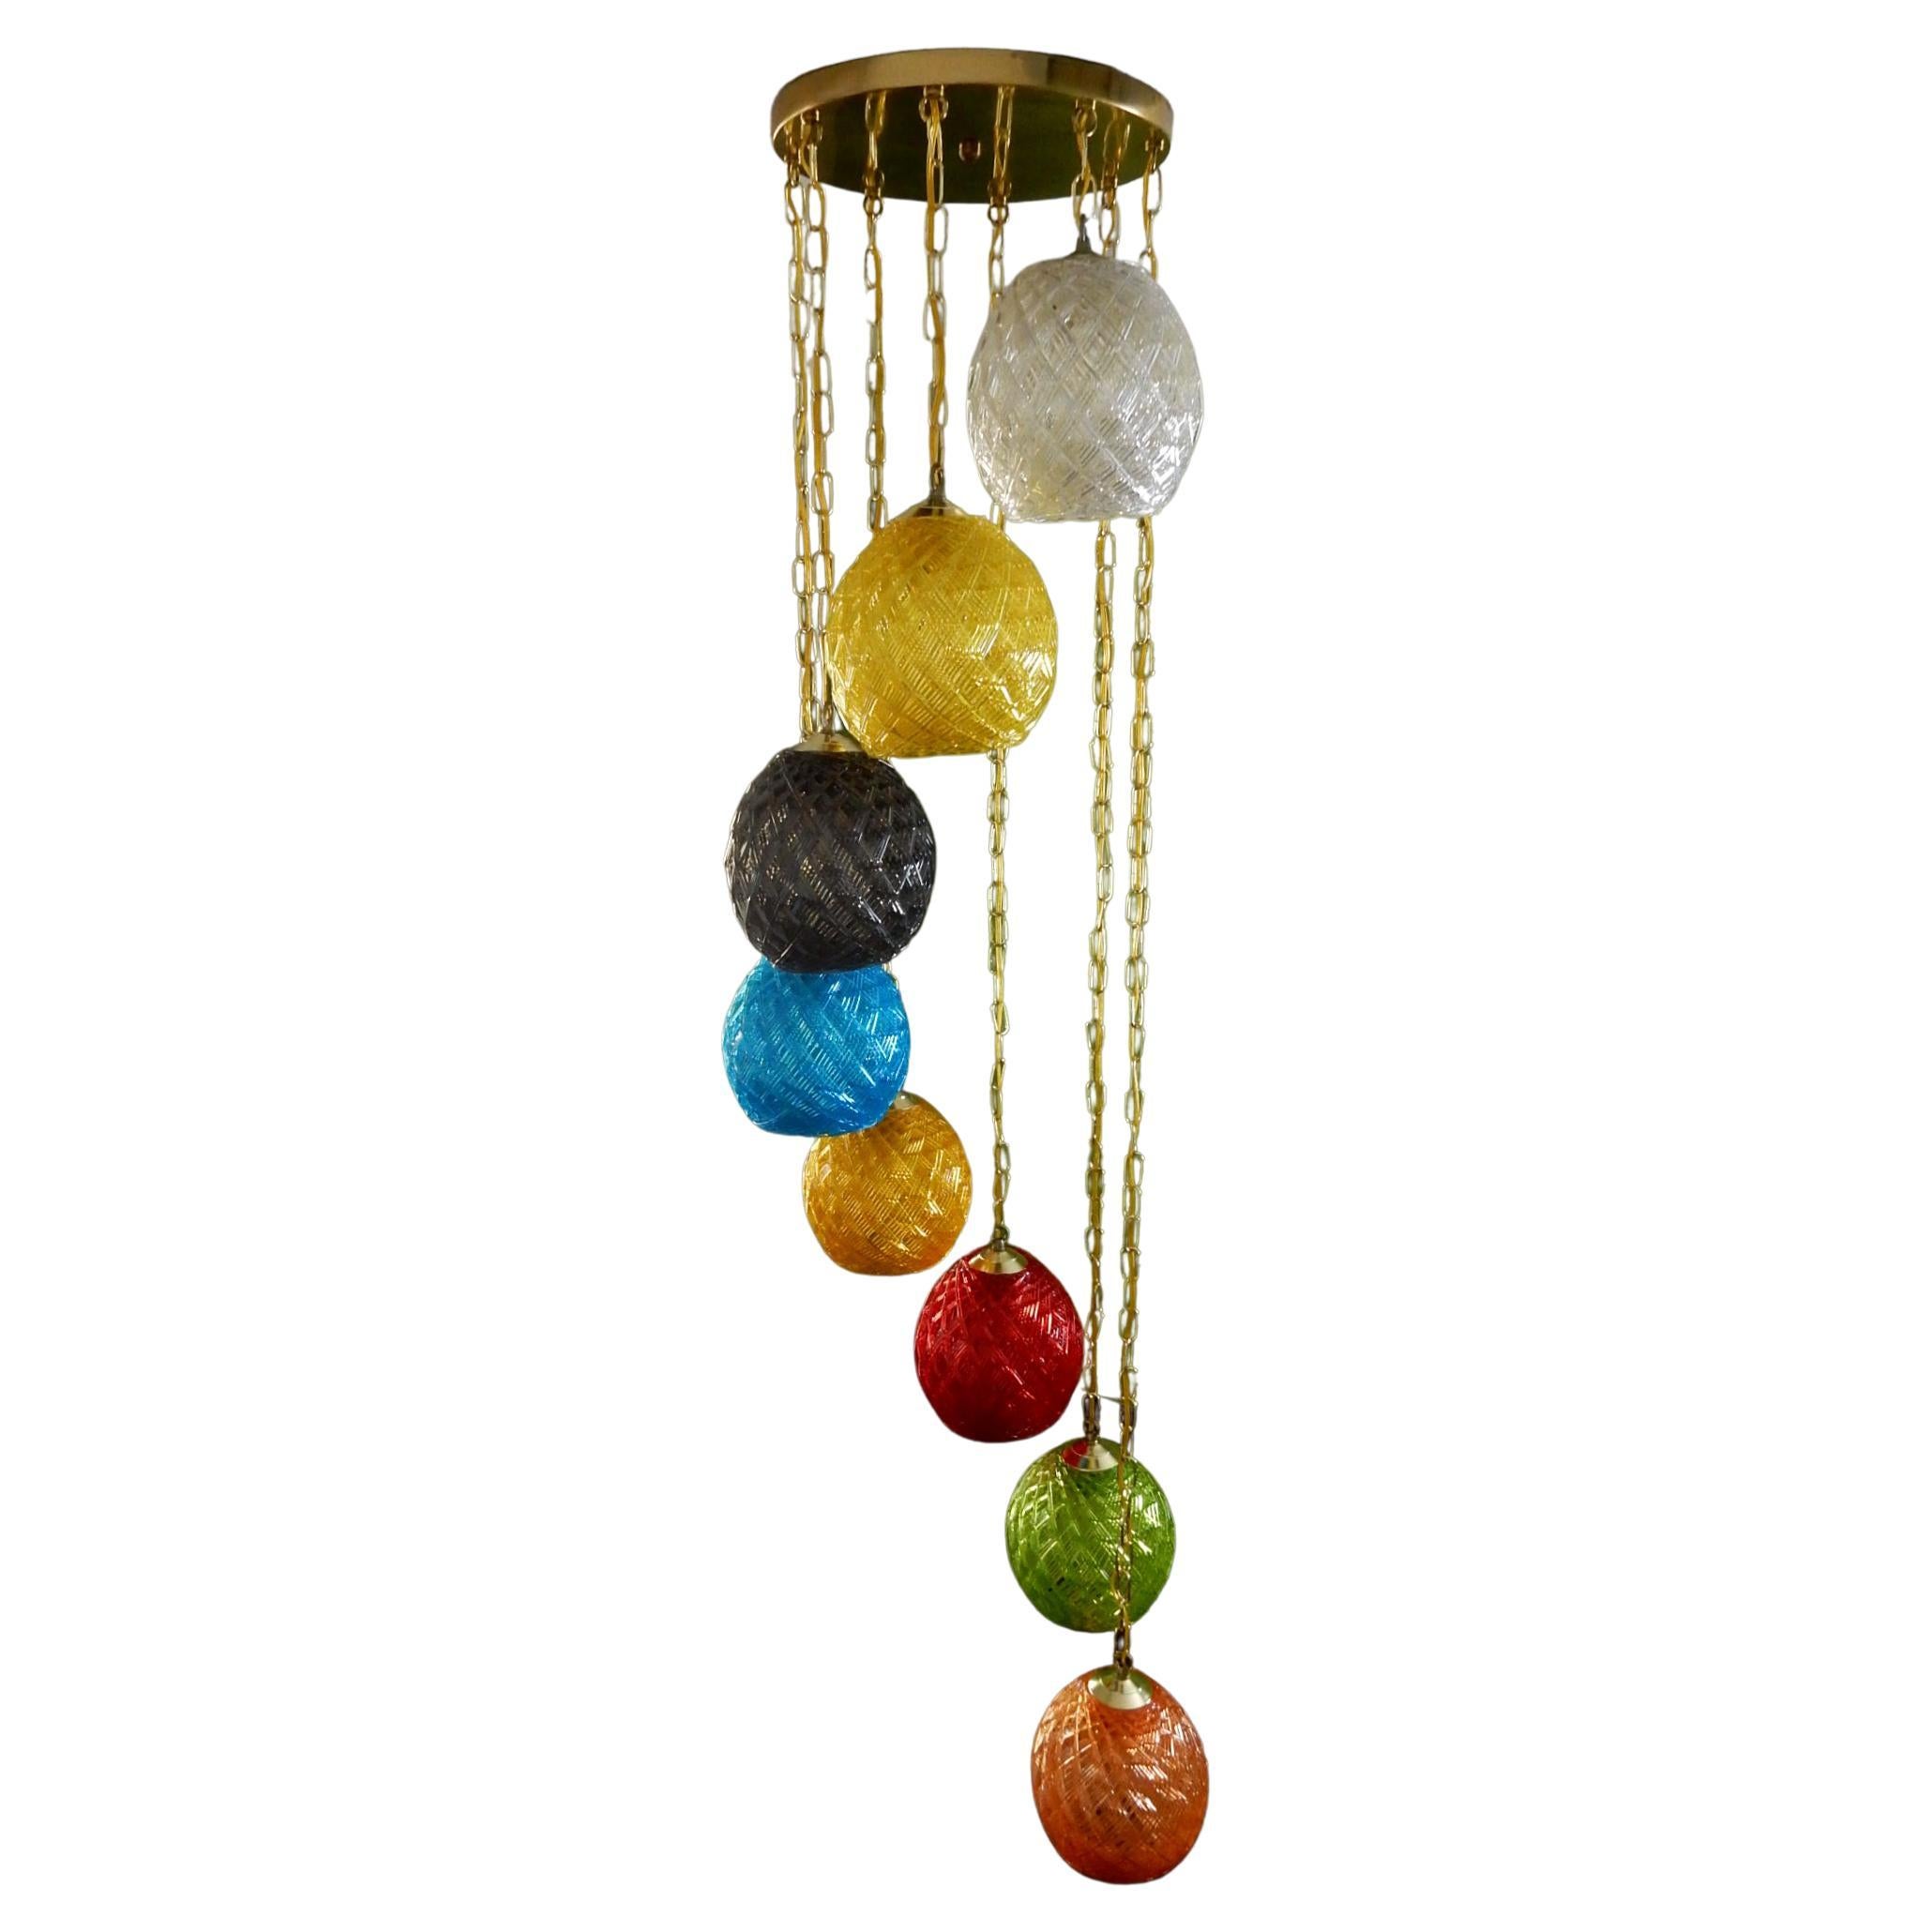 An amazing 8 shade cascading pendant chandelier from the 1960s.
Each colored shade of crystal Lucite in a geometric woven pattern.
Gleaming brass chain and large ceiling cap. Porcelain sockets.
This piece has been cleaned, rewired and is ready to